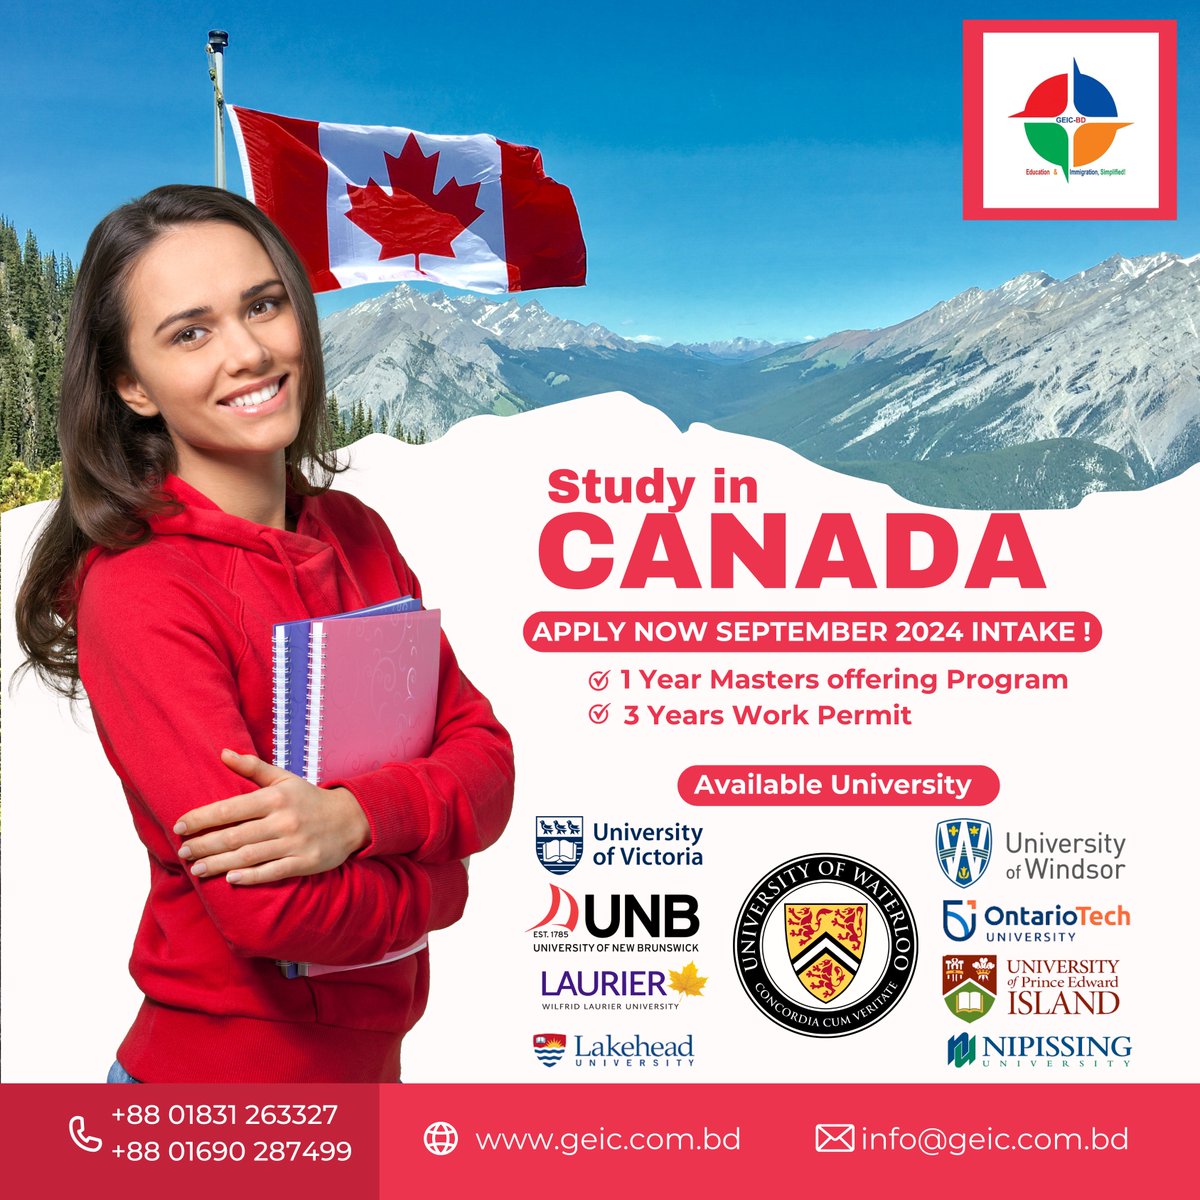 ' Study in Canada '
With top ranked university in Canada for master’s program.
#study #studyabroad #studyabroadlife #studymotivation #studyincanada #studyinCANADA2024 #studyincanada📷 #studyincanadanow